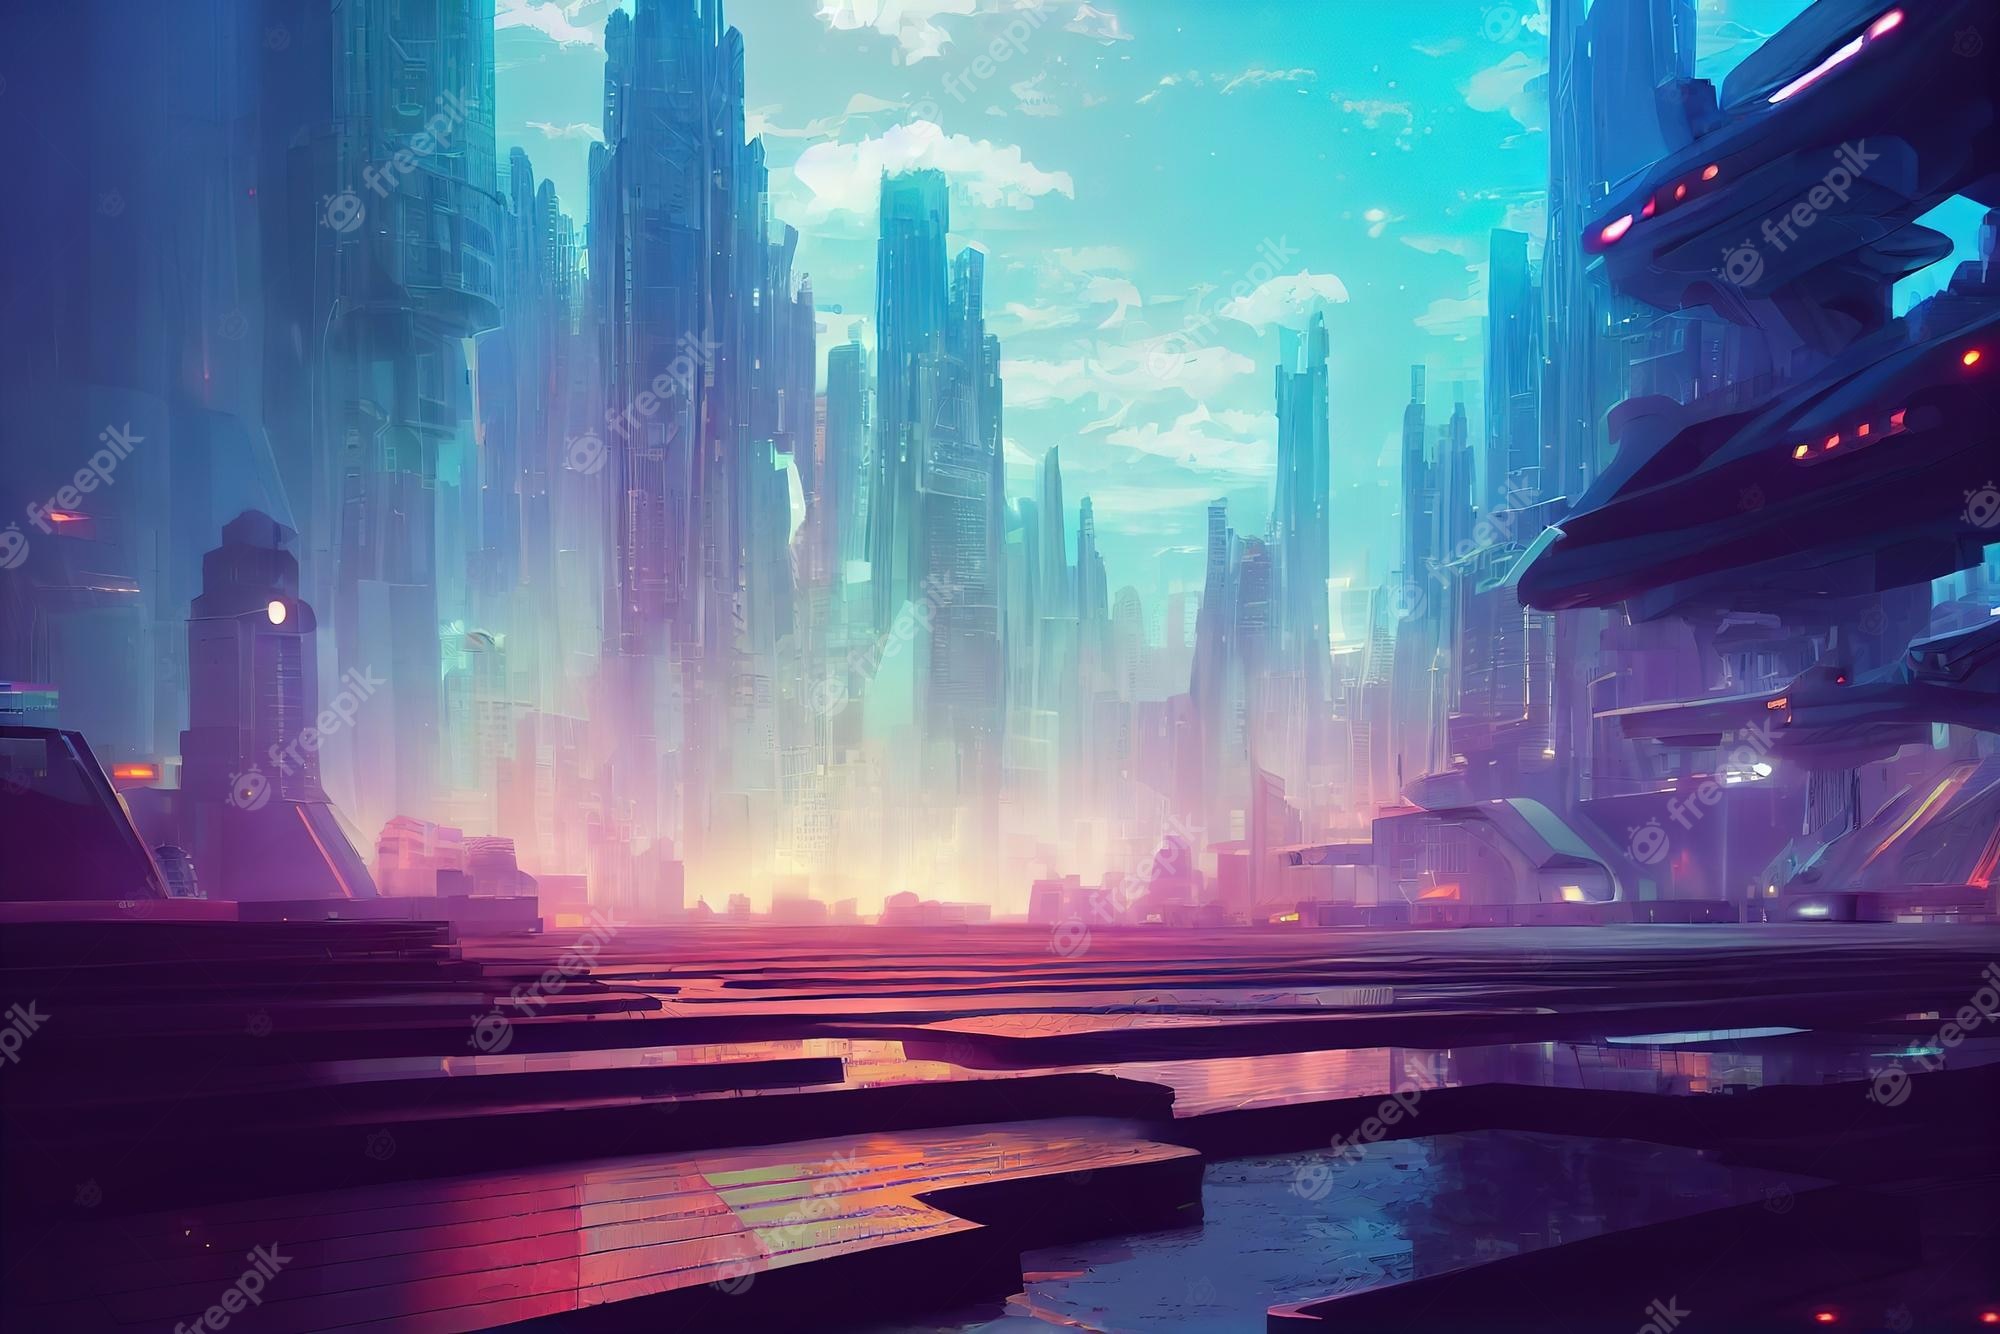 Premium Photo. Colorful cyberpunk metaverse city background in anime style concept art digital painting fantasy illustration